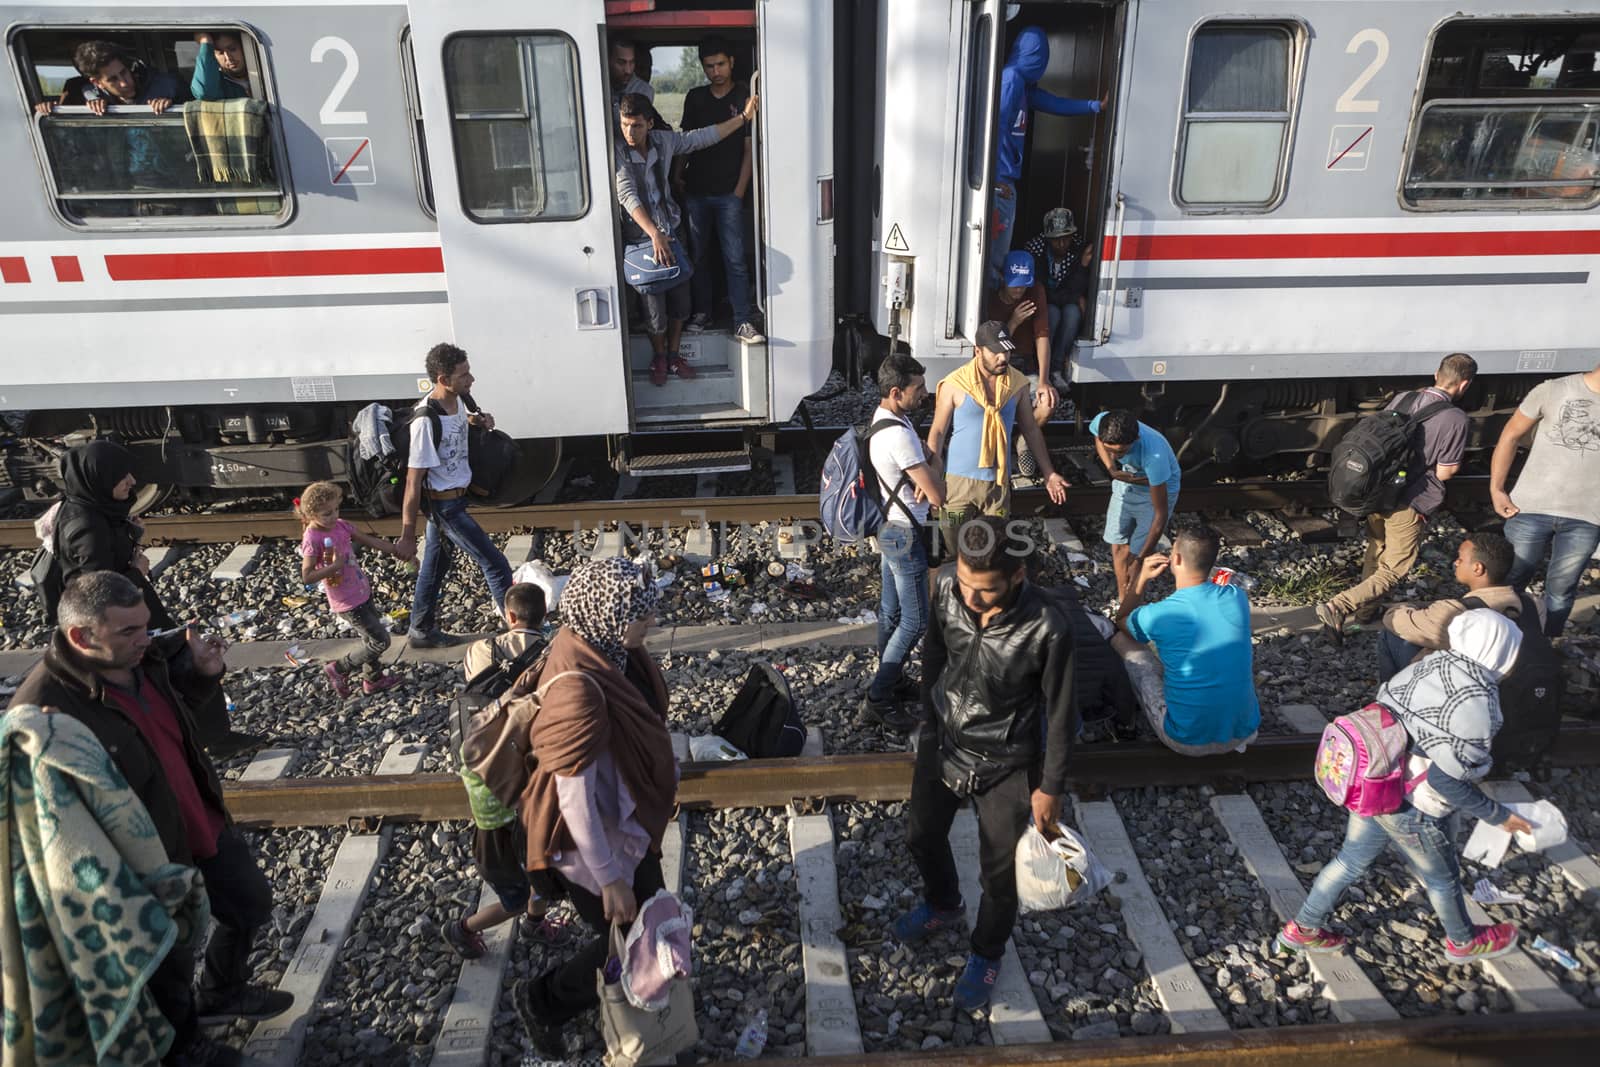 CROATIA, Tovarnik: Refugees line up and wait at the railway station in Tovarnik, Croatia near the Serbian-border on September 18, 2015. Refugees are hoping to continue their journey to Germany and Northern Europe via Slovenia 